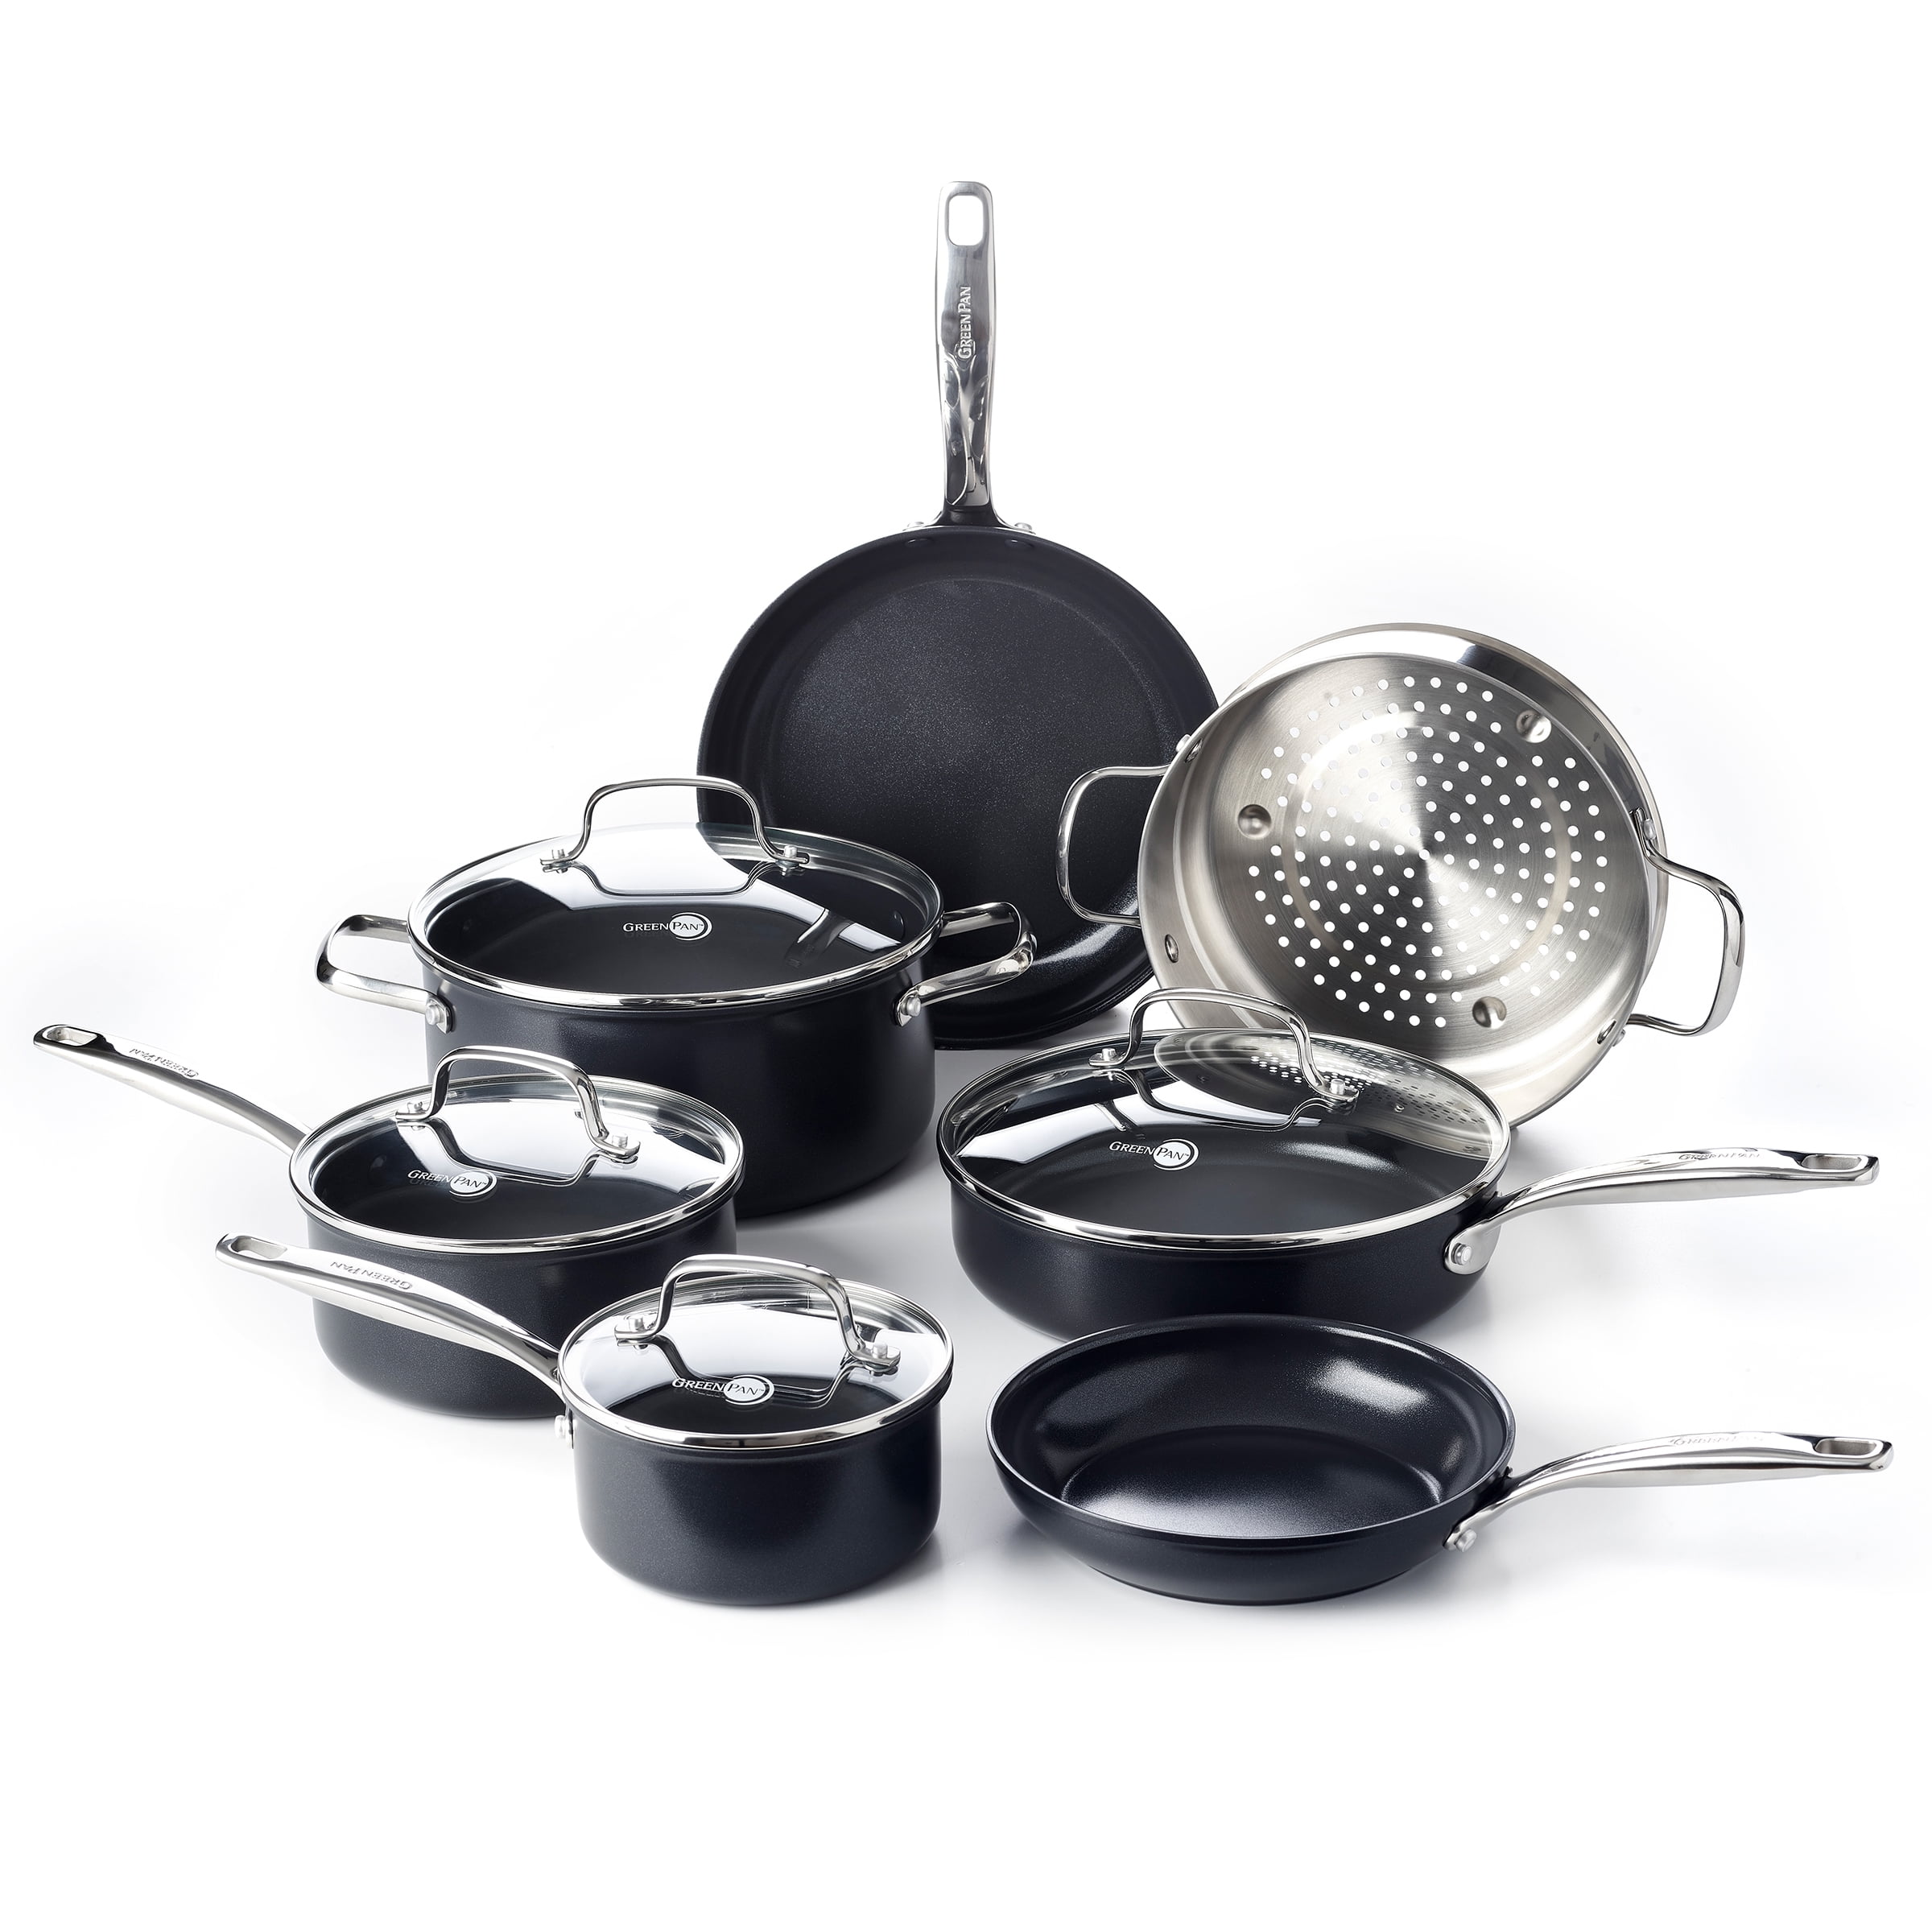 Prime Day Kitchen Deal on Green Pan's Ceramic Nonstick Cookware Set